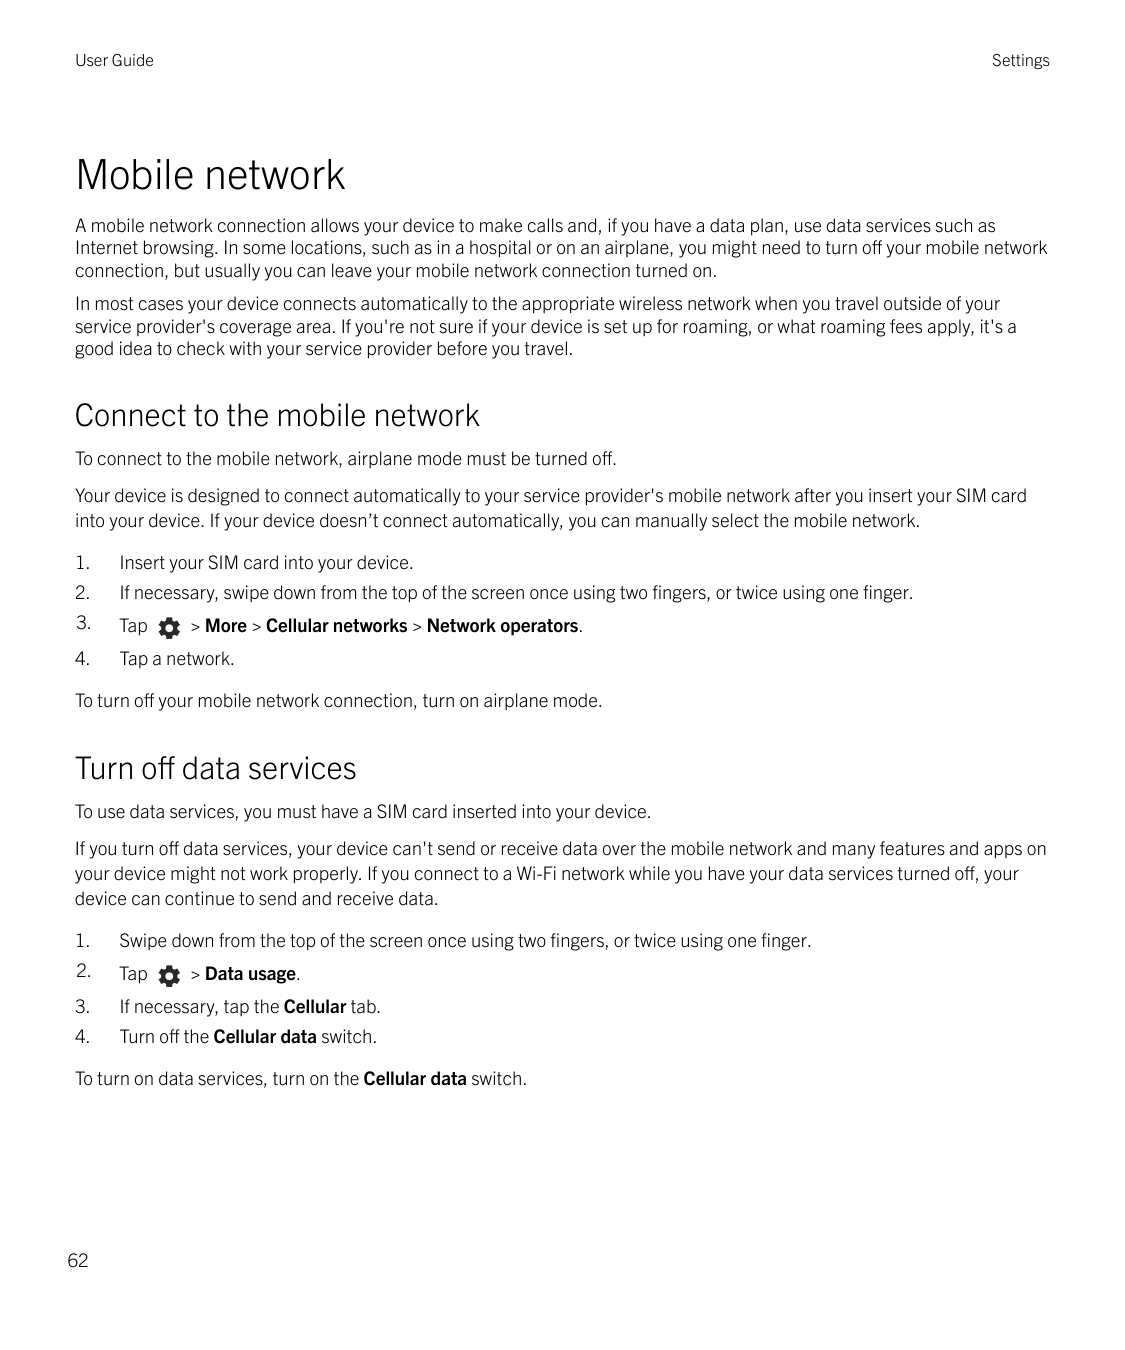 User GuideSettingsMobile networkA mobile network connection allows your device to make calls and, if you have a data plan, use d